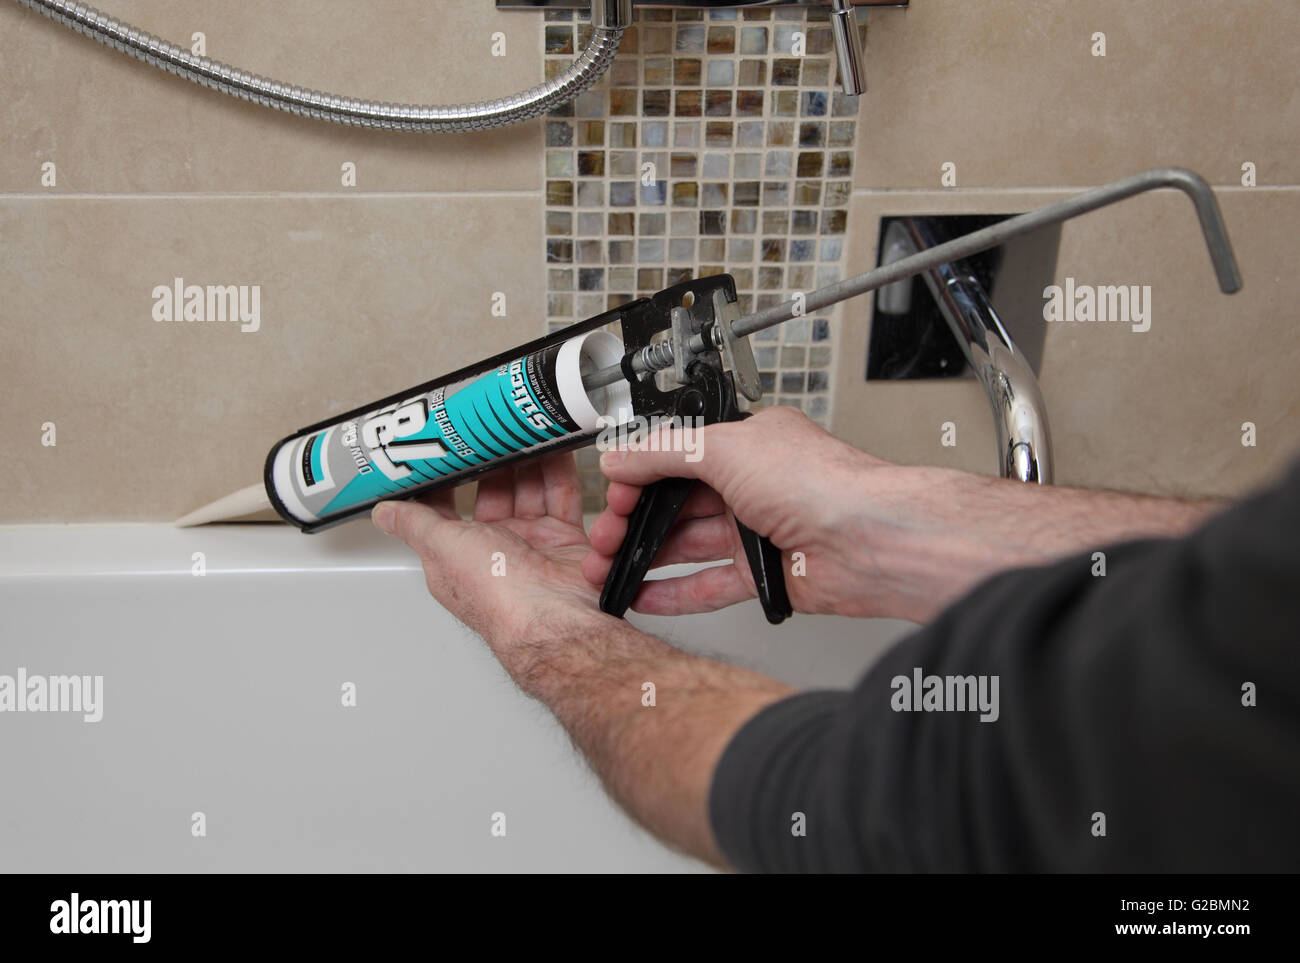 A plumber uses a mastic gun to apply stone-coloured silicone sealant between tiles and bath edge in a modern, tiled bathroom Stock Photo